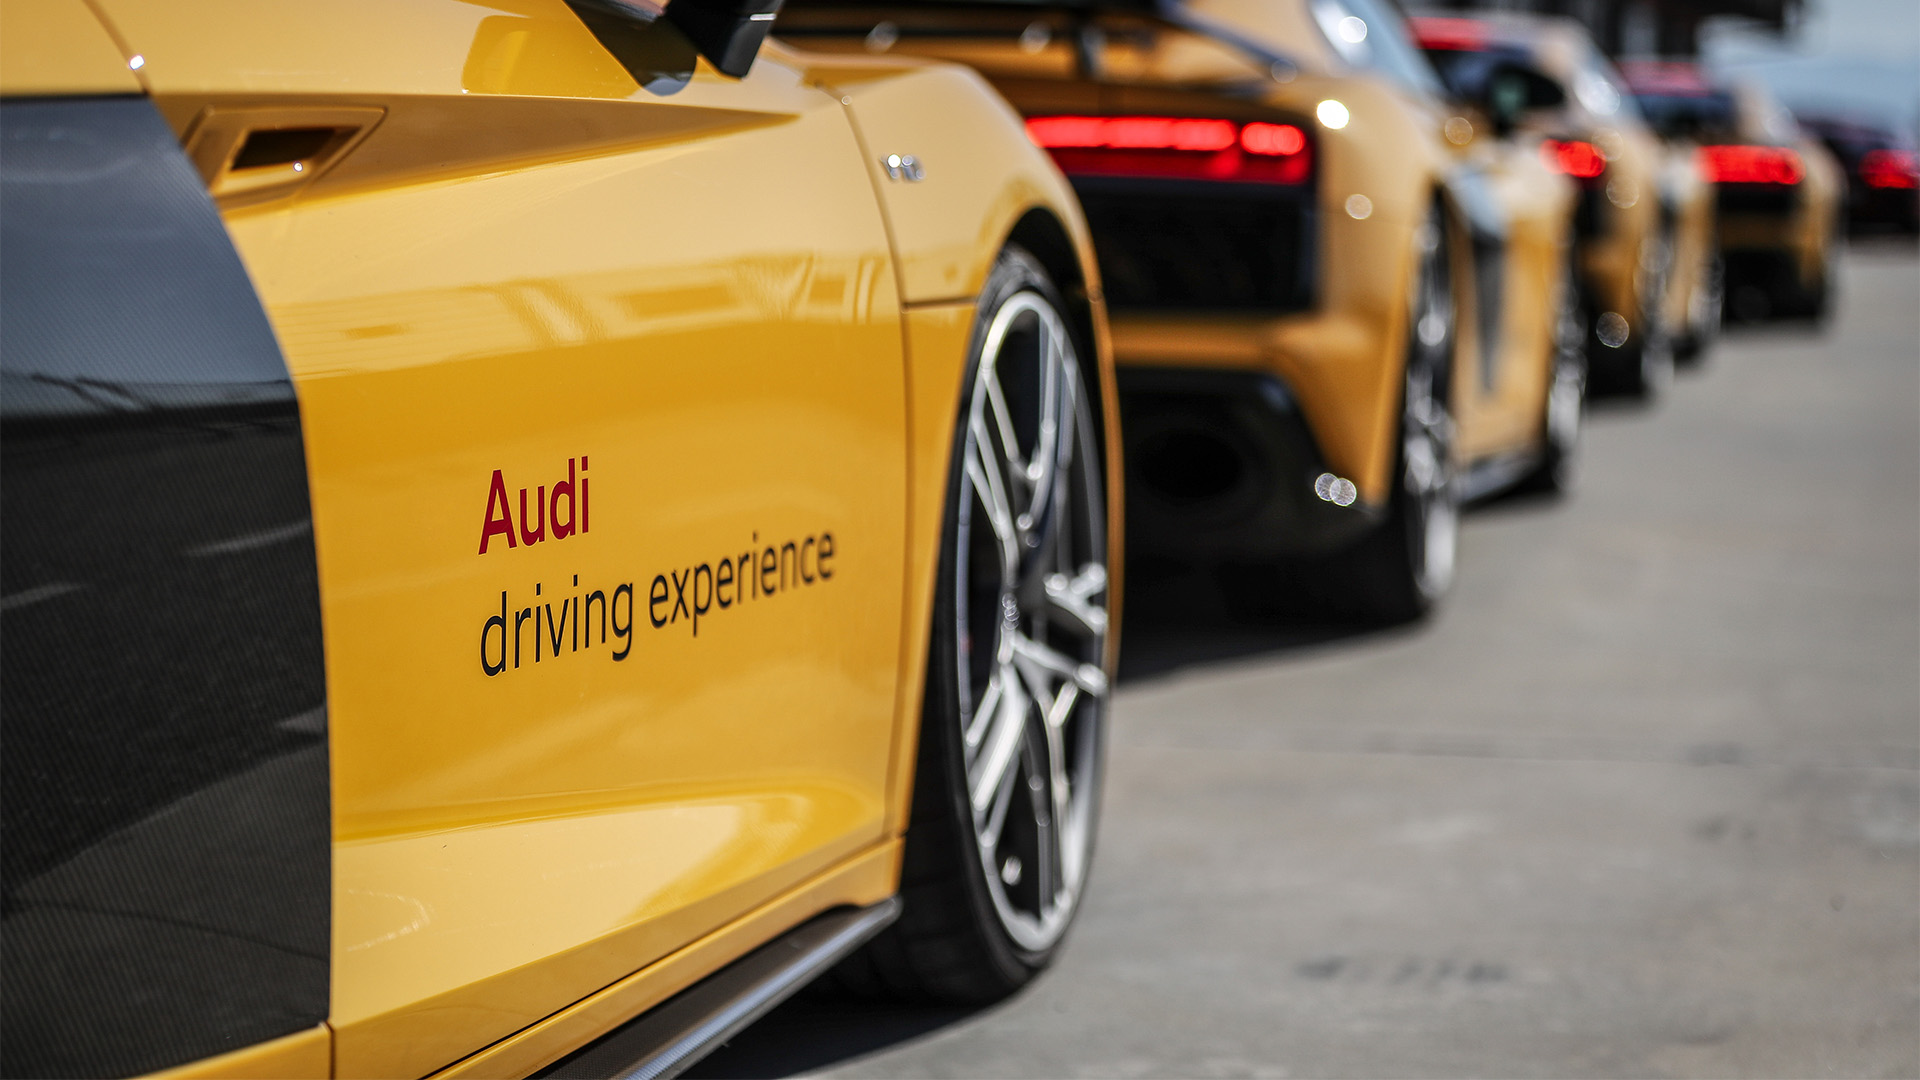 Many yellow Audi models in a row from the side with the Audi driving experience inscription